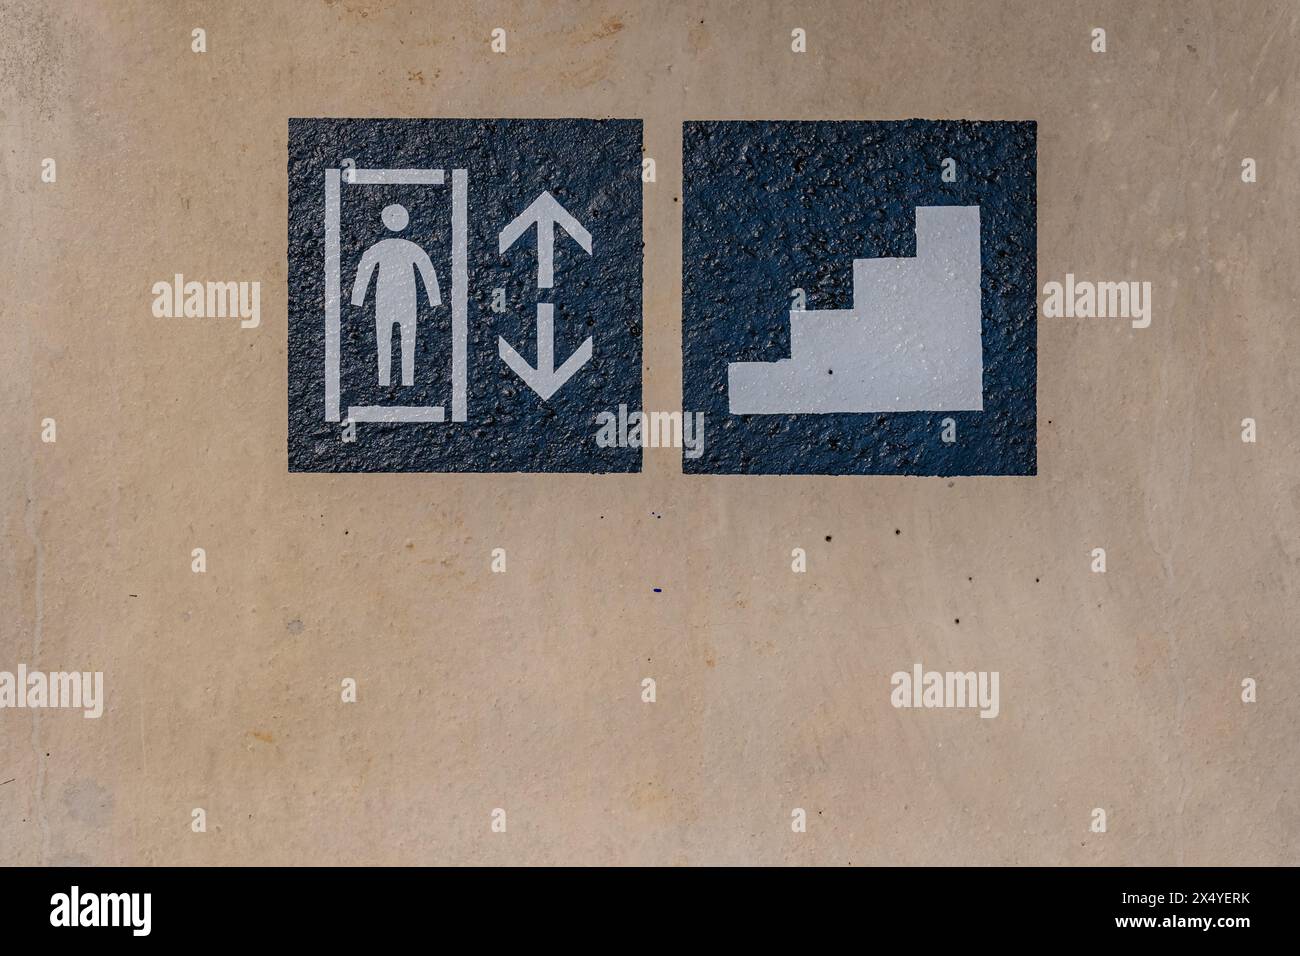 Close-up photo of a painted elevator and stairs sign on a concrete wall within a parking garage, car park. Stock Photo